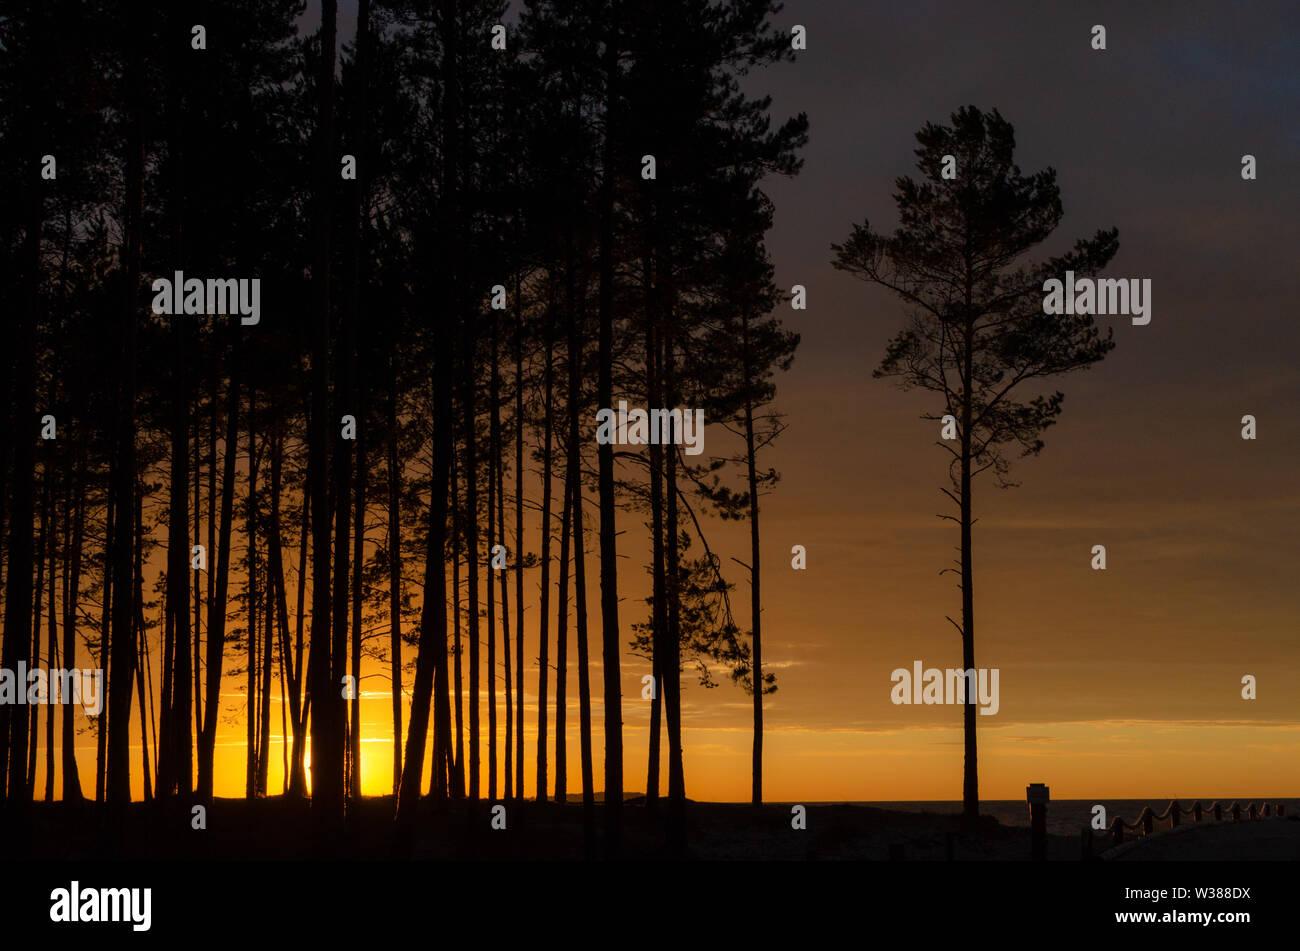 Silhouette of trees at sunset by the sea. Stock Photo